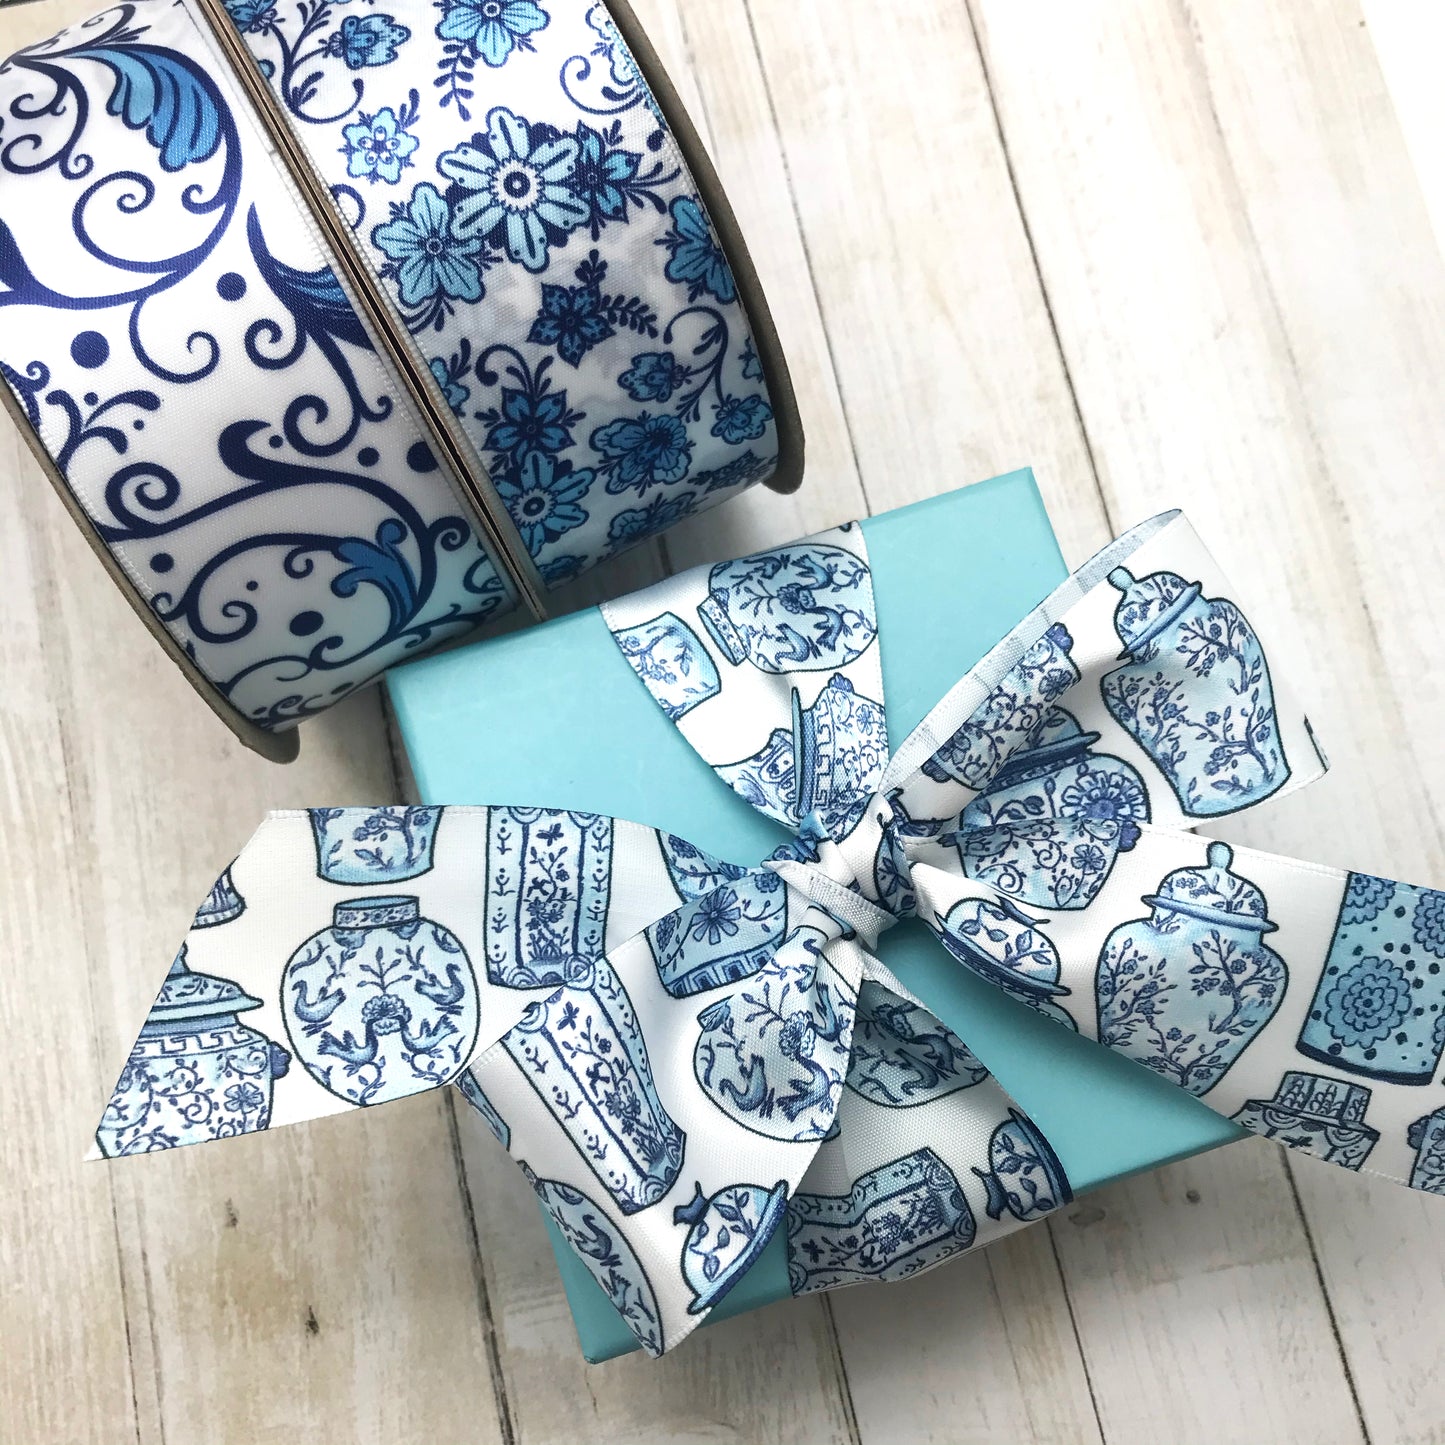 Ginger Jar ribbon in blue and white Chinoiserie style designs printed on 7/8" and 1.5" white single face satin ribbon